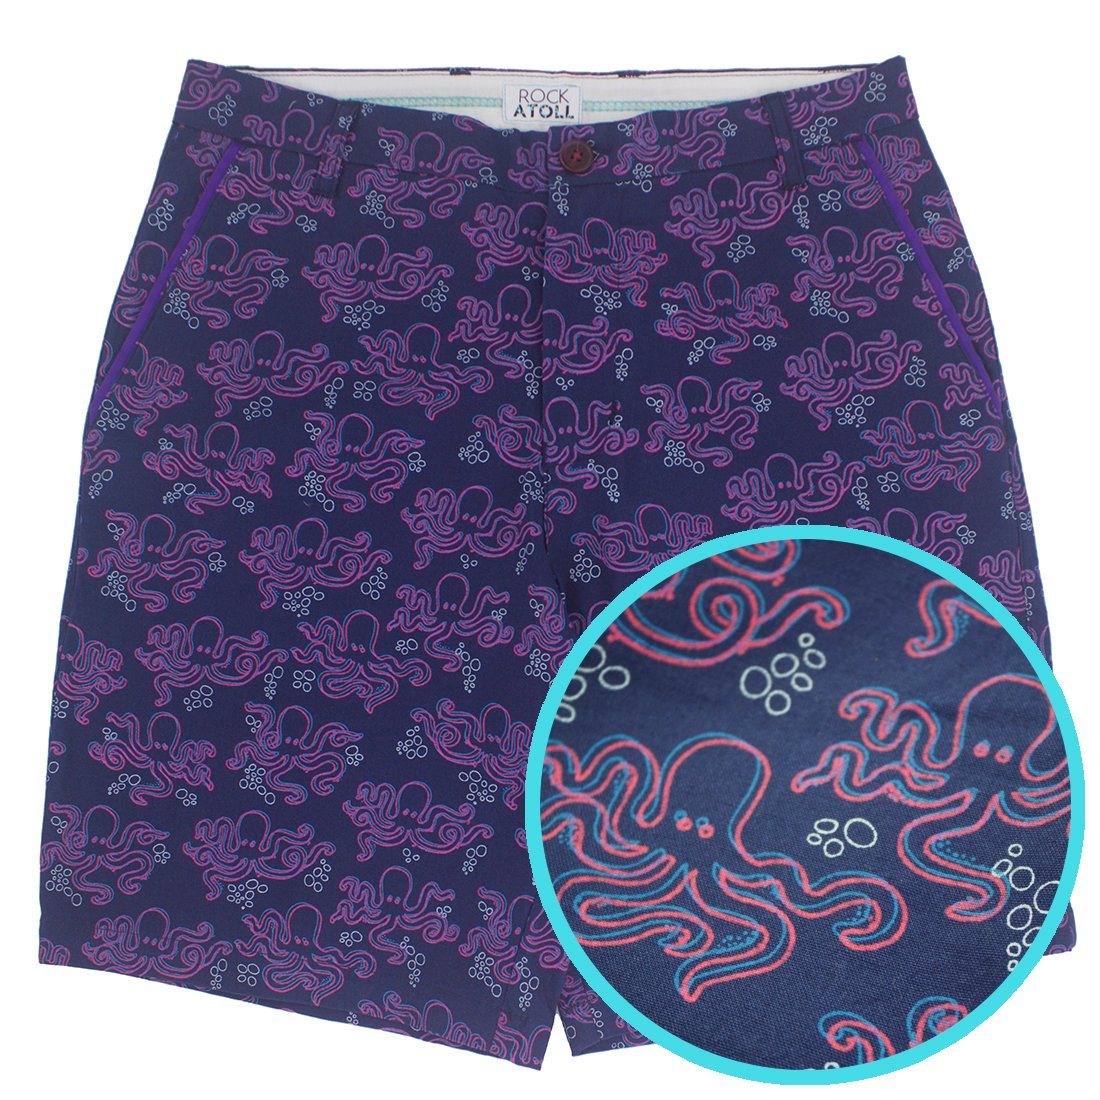 Octopus All Over Print Bermuda Shorts for Men in Navy Blue